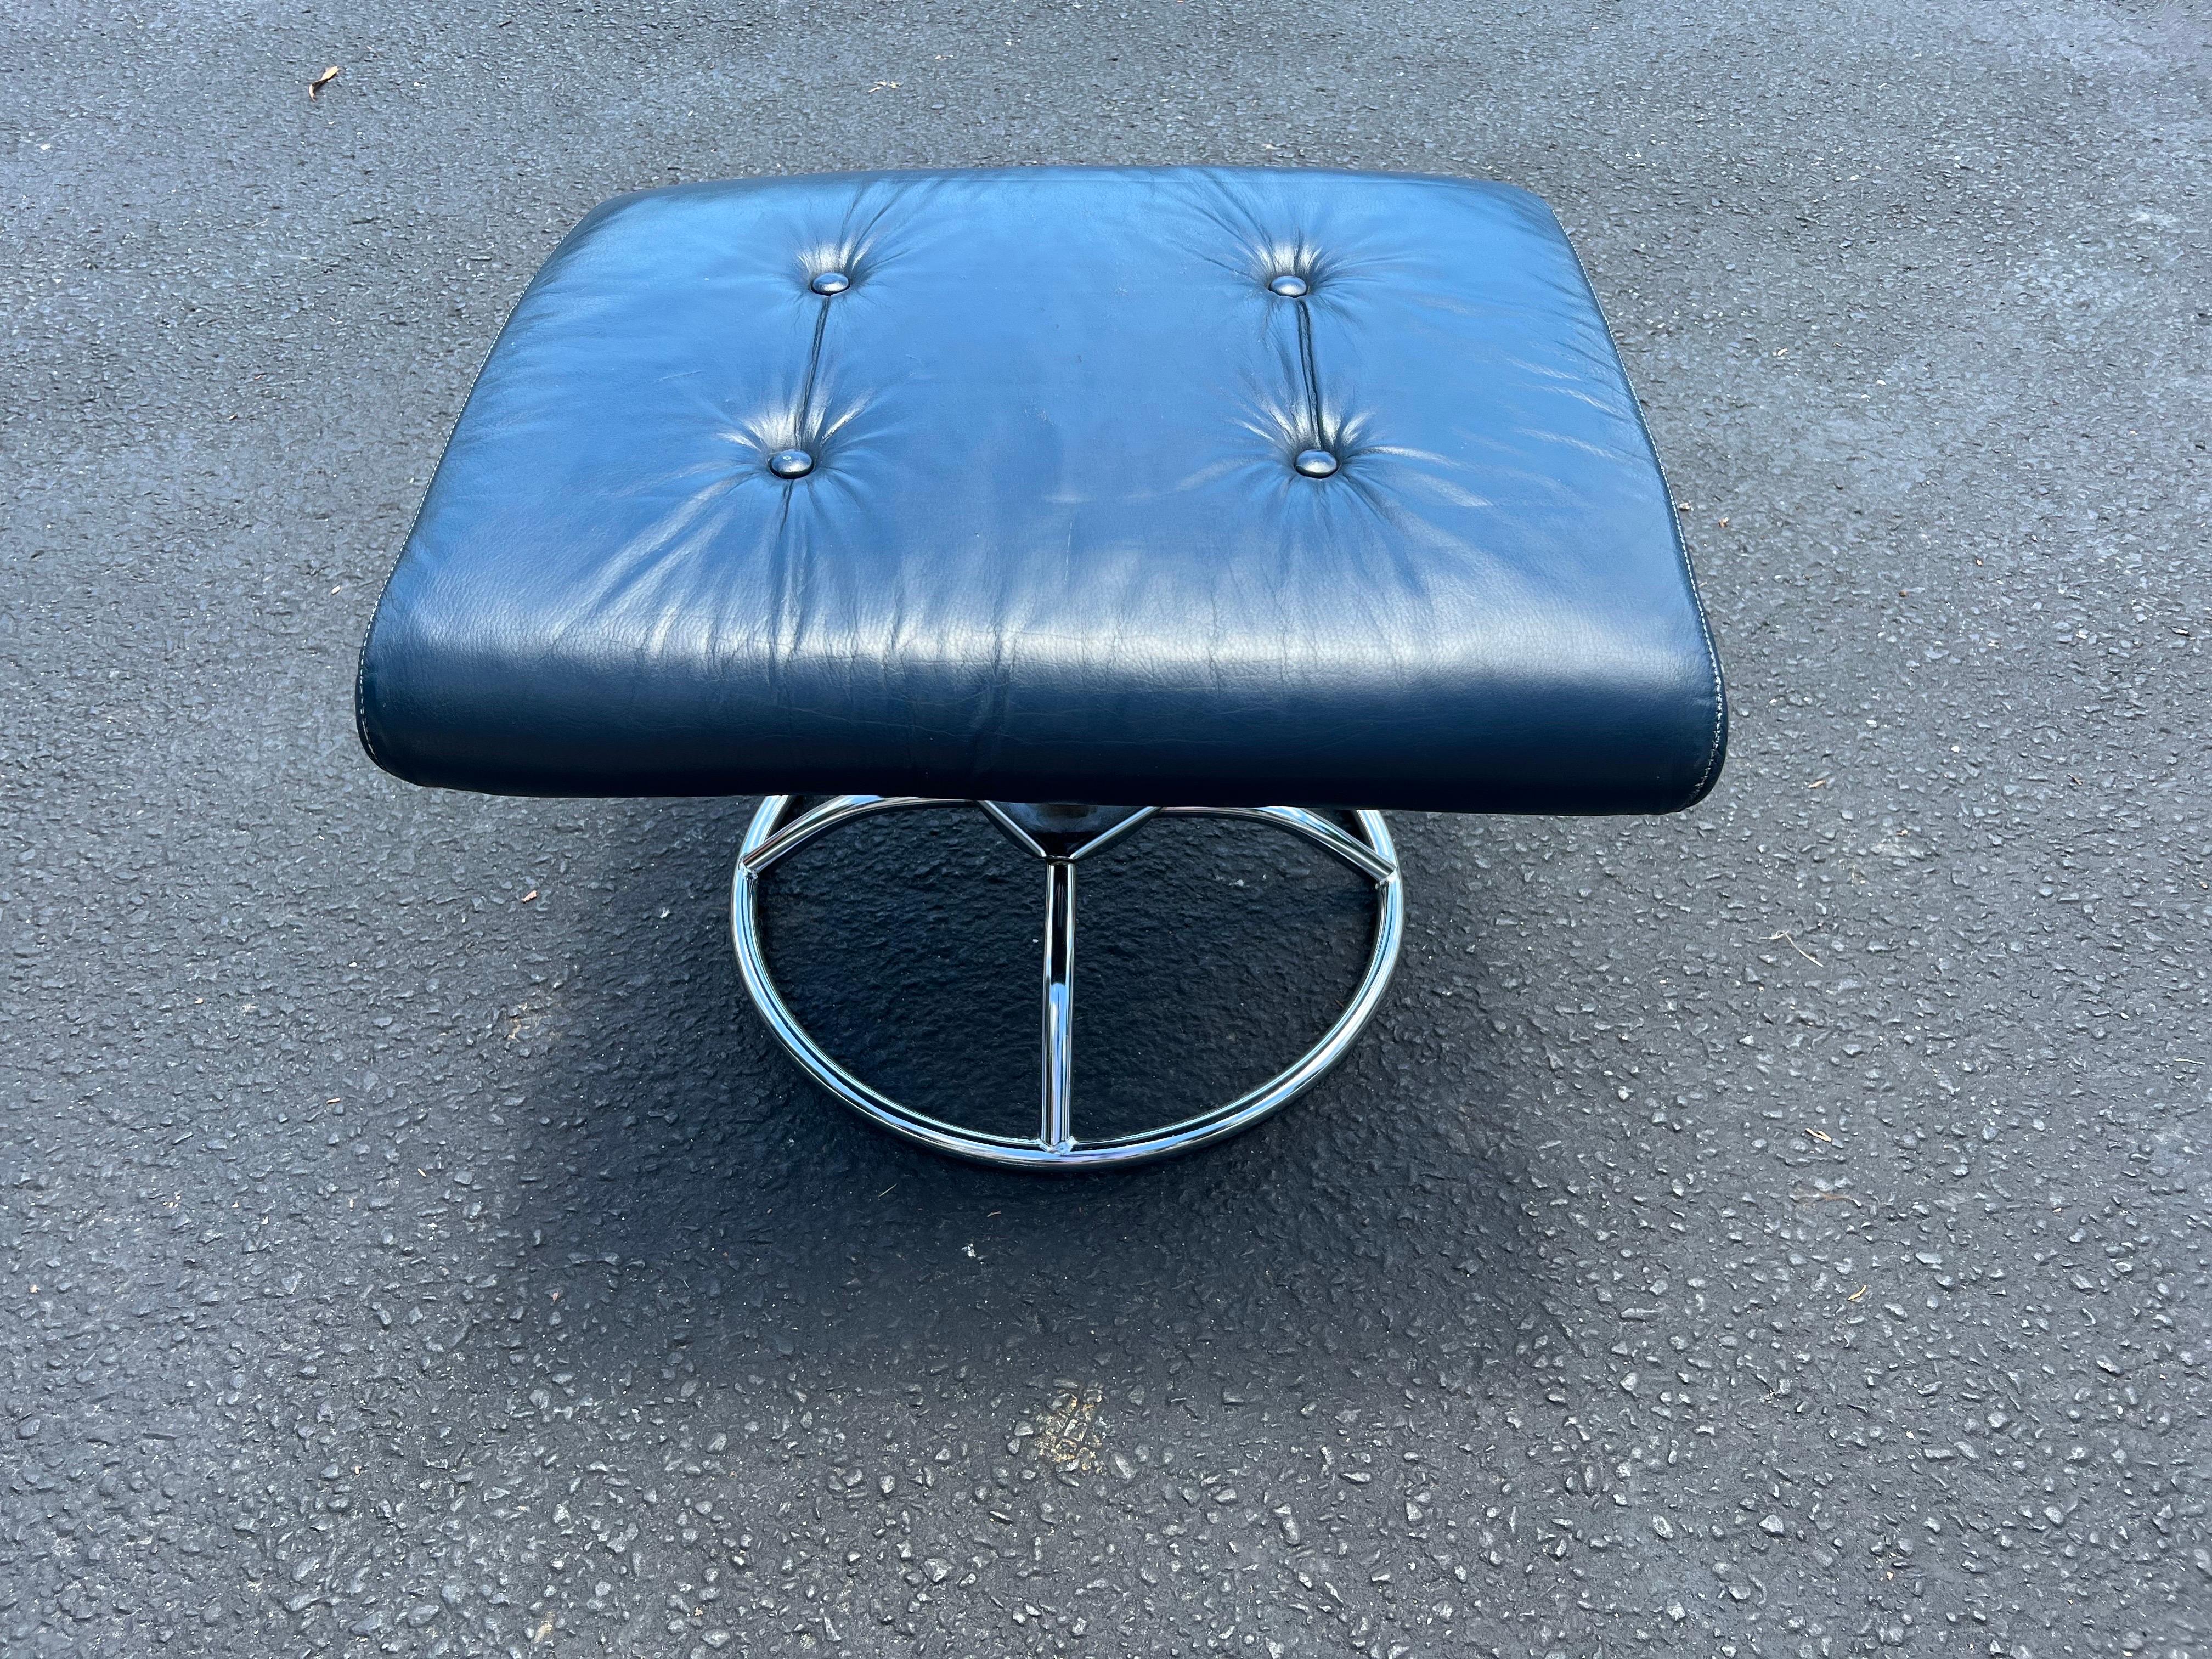 Ekornes stressless blue leather ottoman in chrome. Perfect if you have the matching chair. Classic styling with round swivel base. This item Can parcel ship for under $99. Please request a parcel quote.